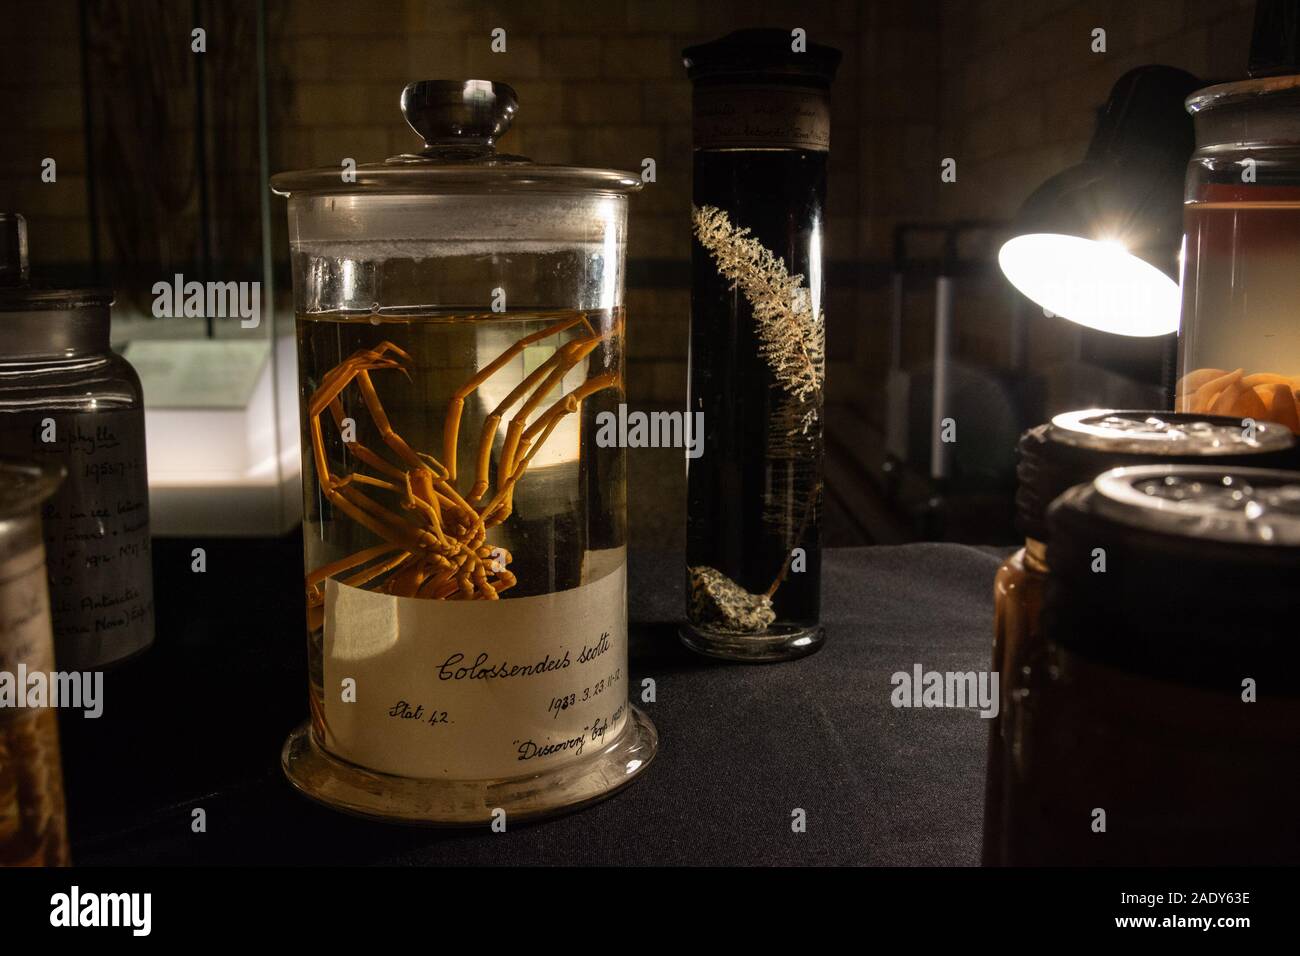 Natural History Museum, London, UK 29th November 2019. Bottled specimens on display during a Natural History Museum late night opening. These sea creatures were collected in Antartic waters. The late opening of the museum was themed around the new David Attenborough nature documentary 'Seven worlds, one planet' and visitors were able to meet scientists and filmmakers who worked on the series. These vintage specimens of preserved sea creatures were collected from Antartic seas on an expedition on board the Discovery, the ship Scott sailed in to the Antartic. Stock Photo